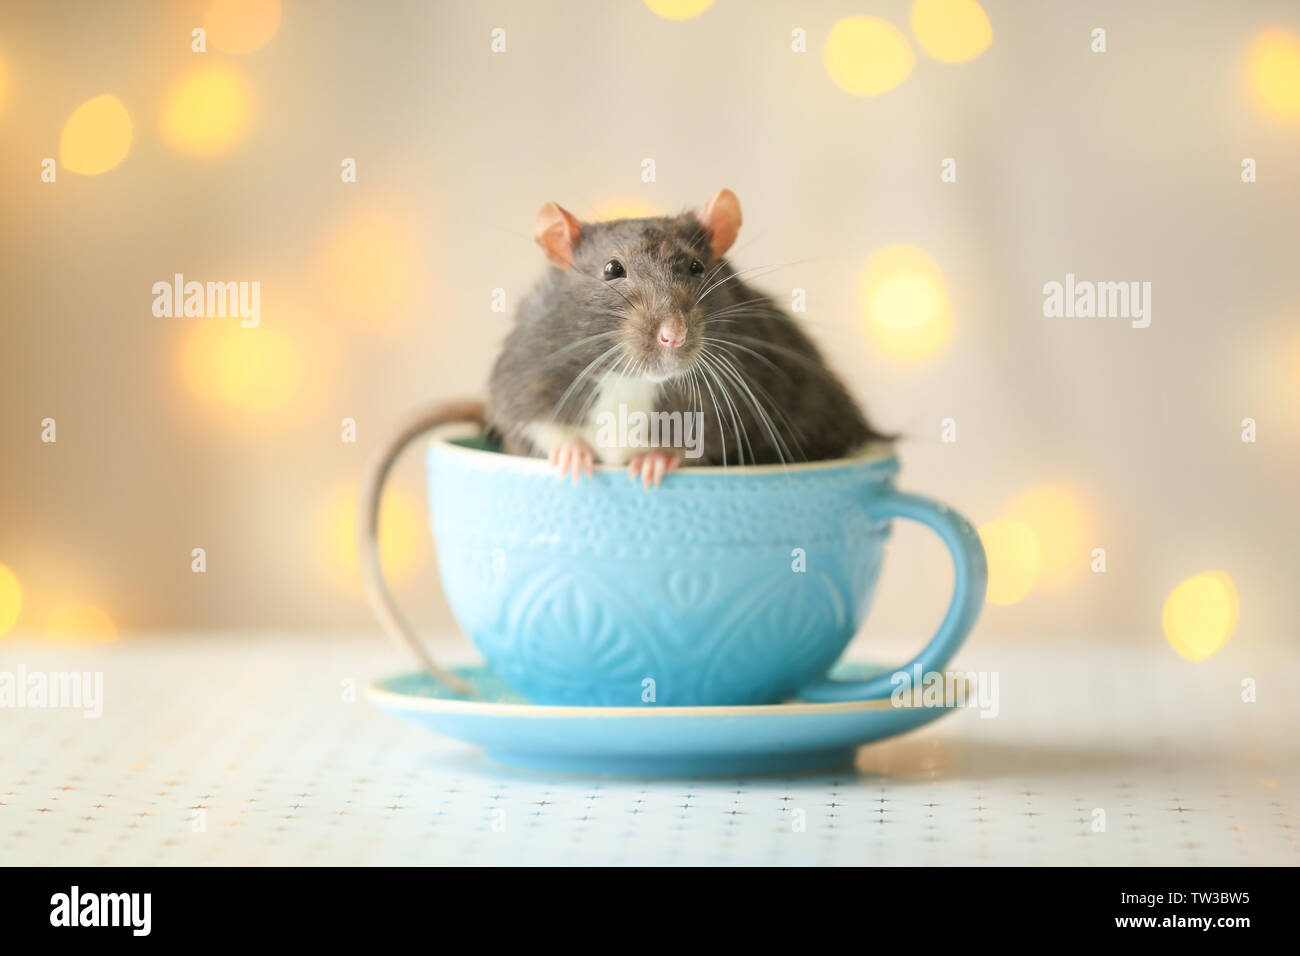 Cute rat in cup and defocused lights on background Stock Photo